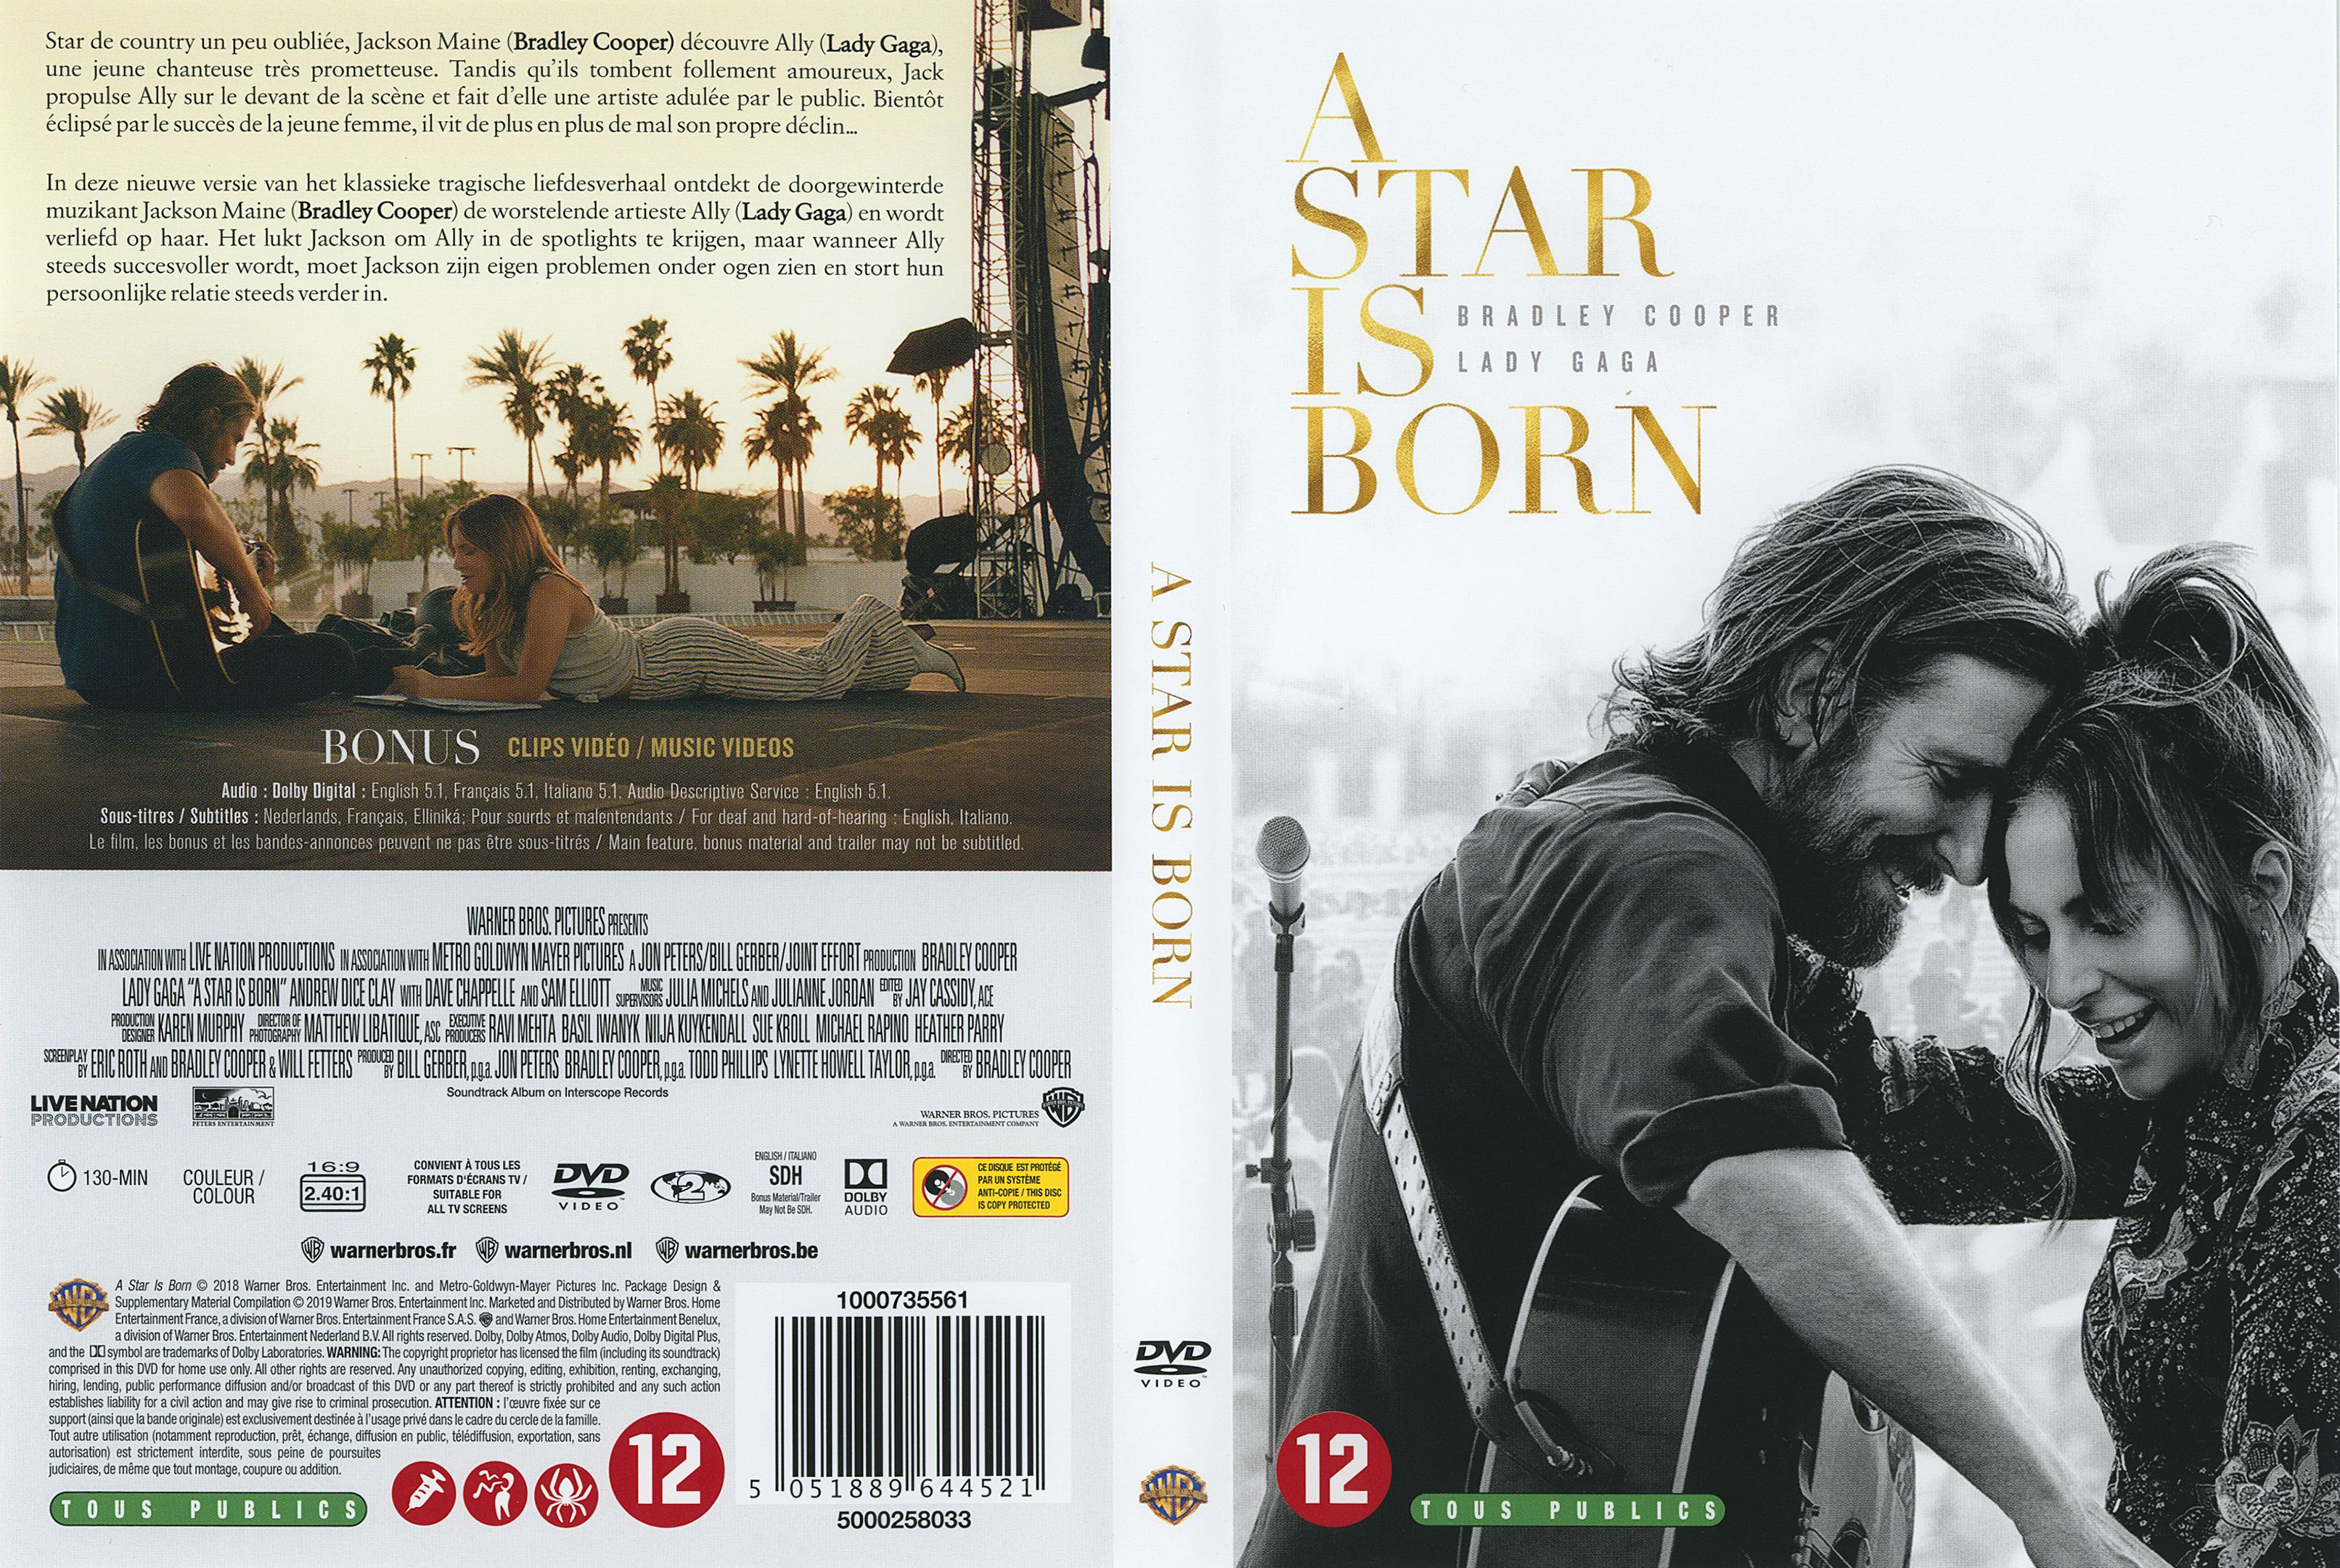 Jaquette DVD A star is born